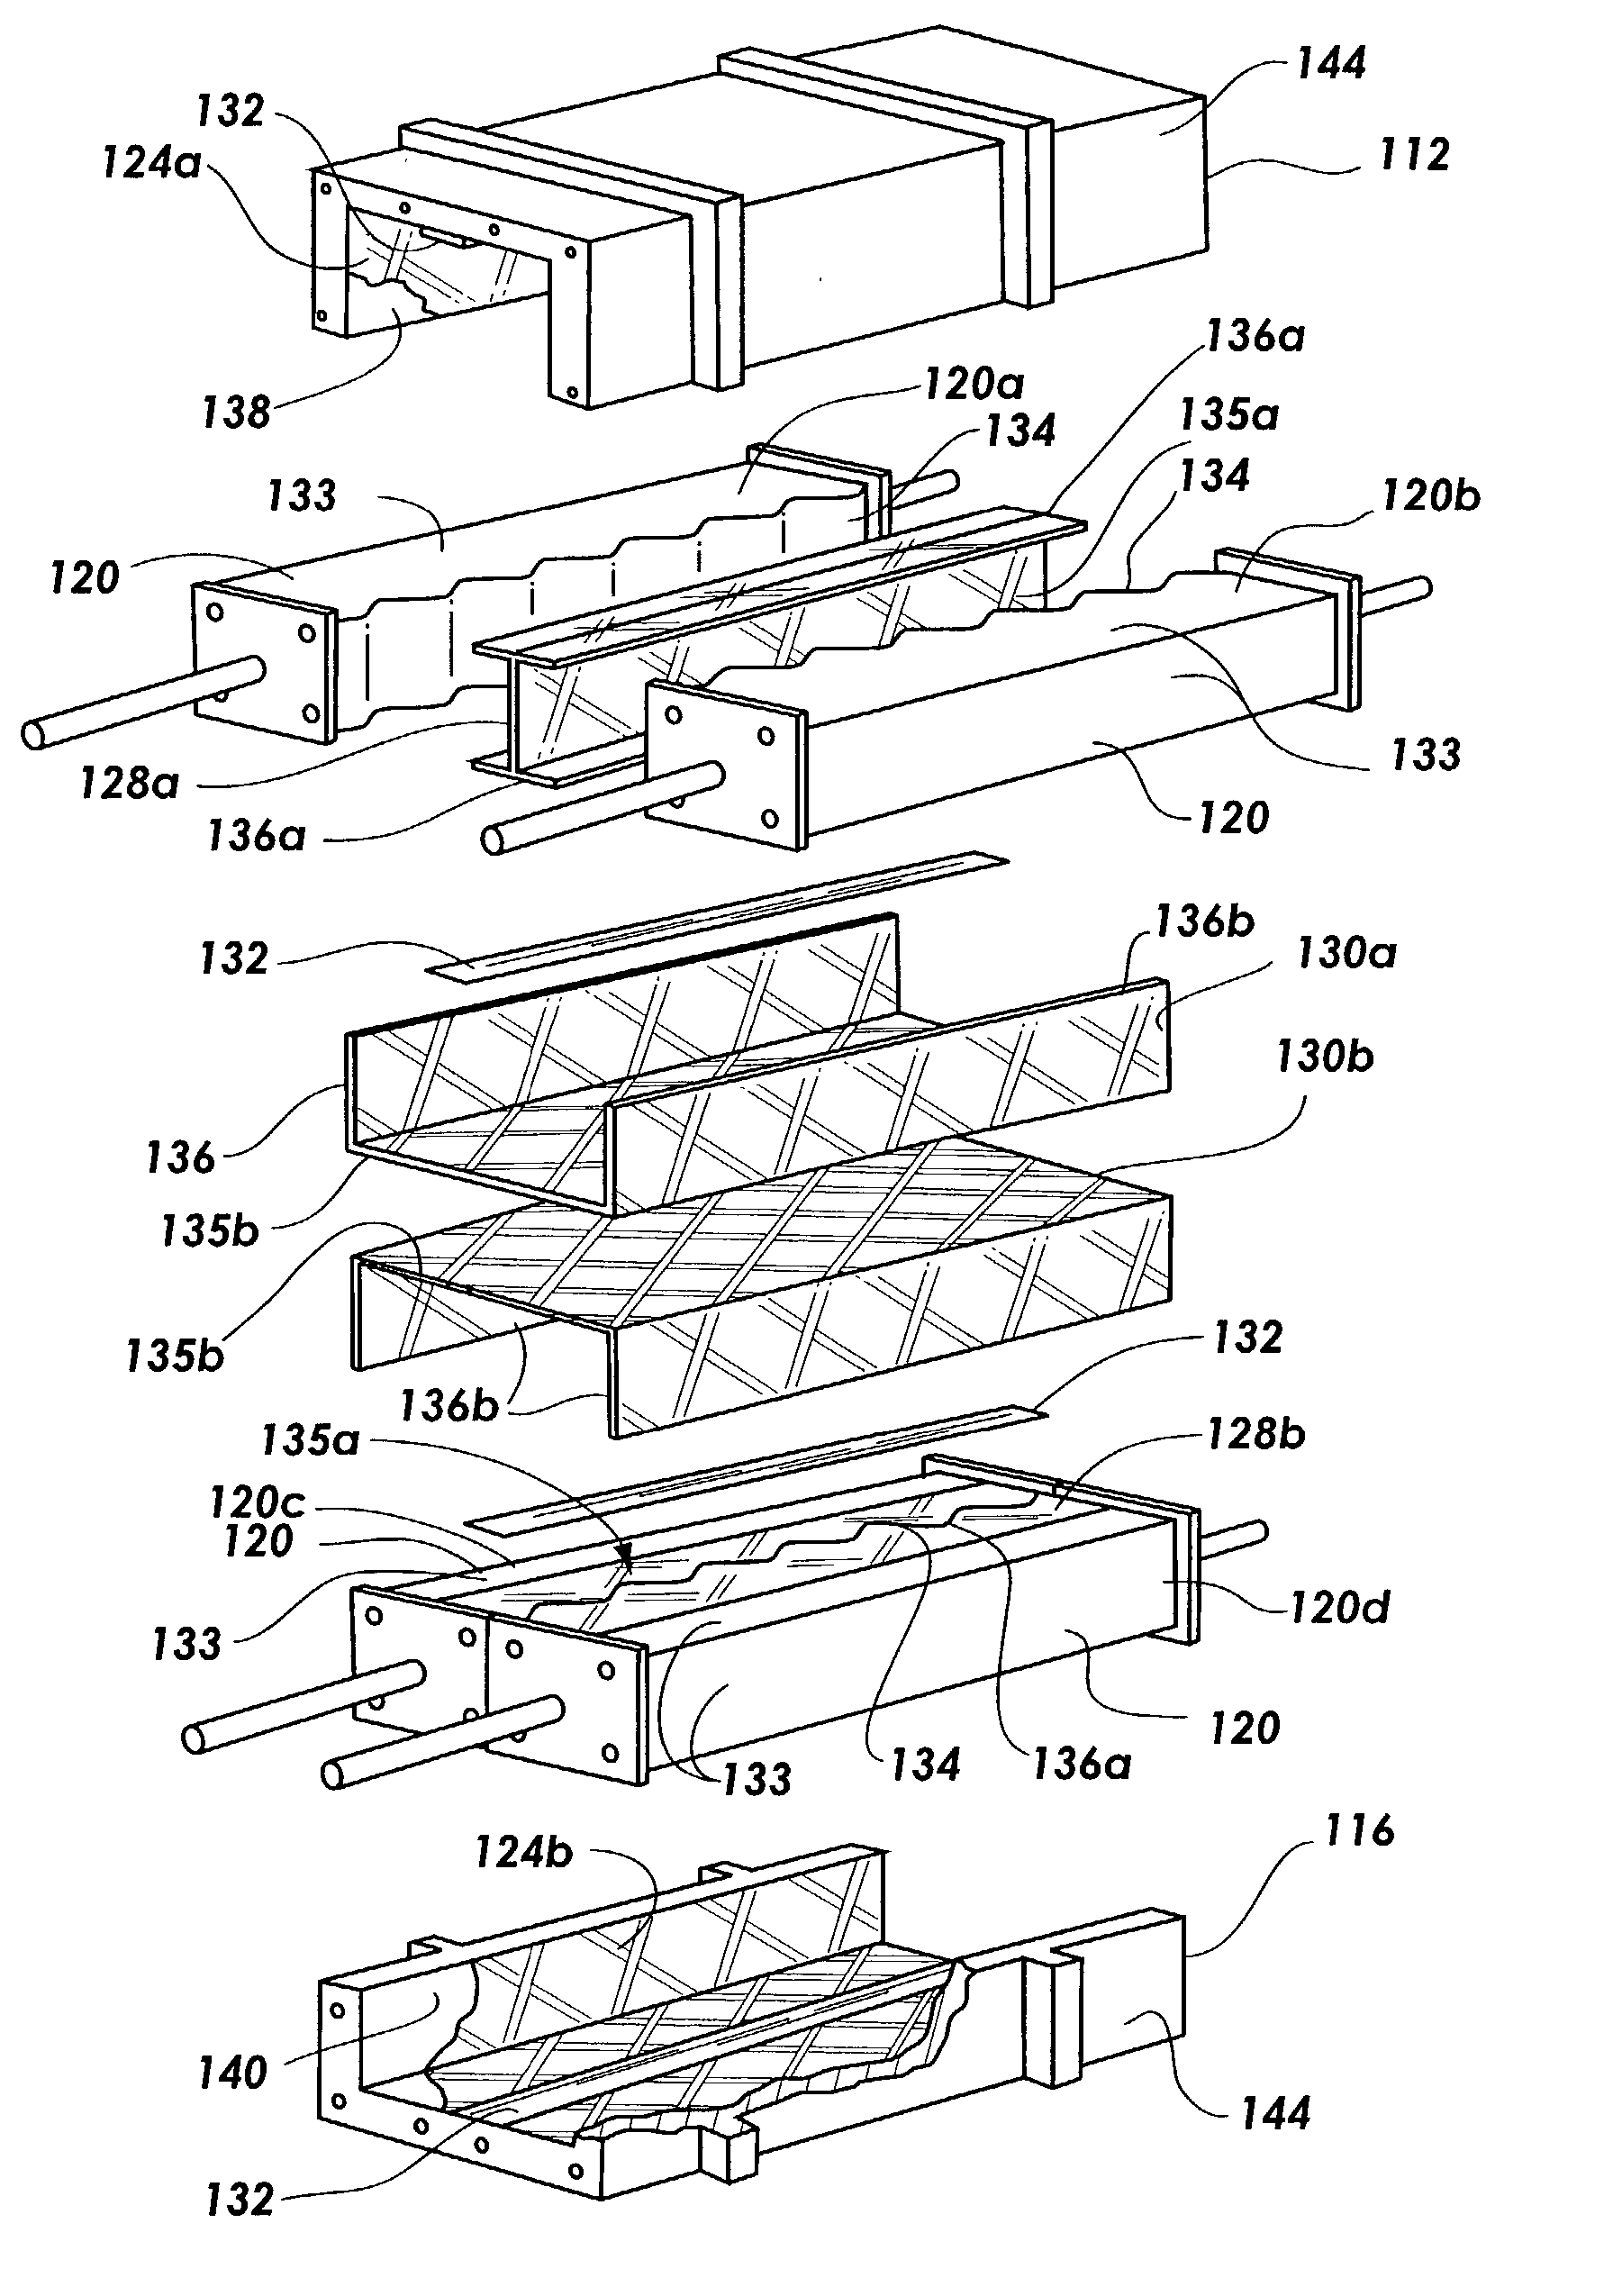 Method of assembling a single piece co-cured structure